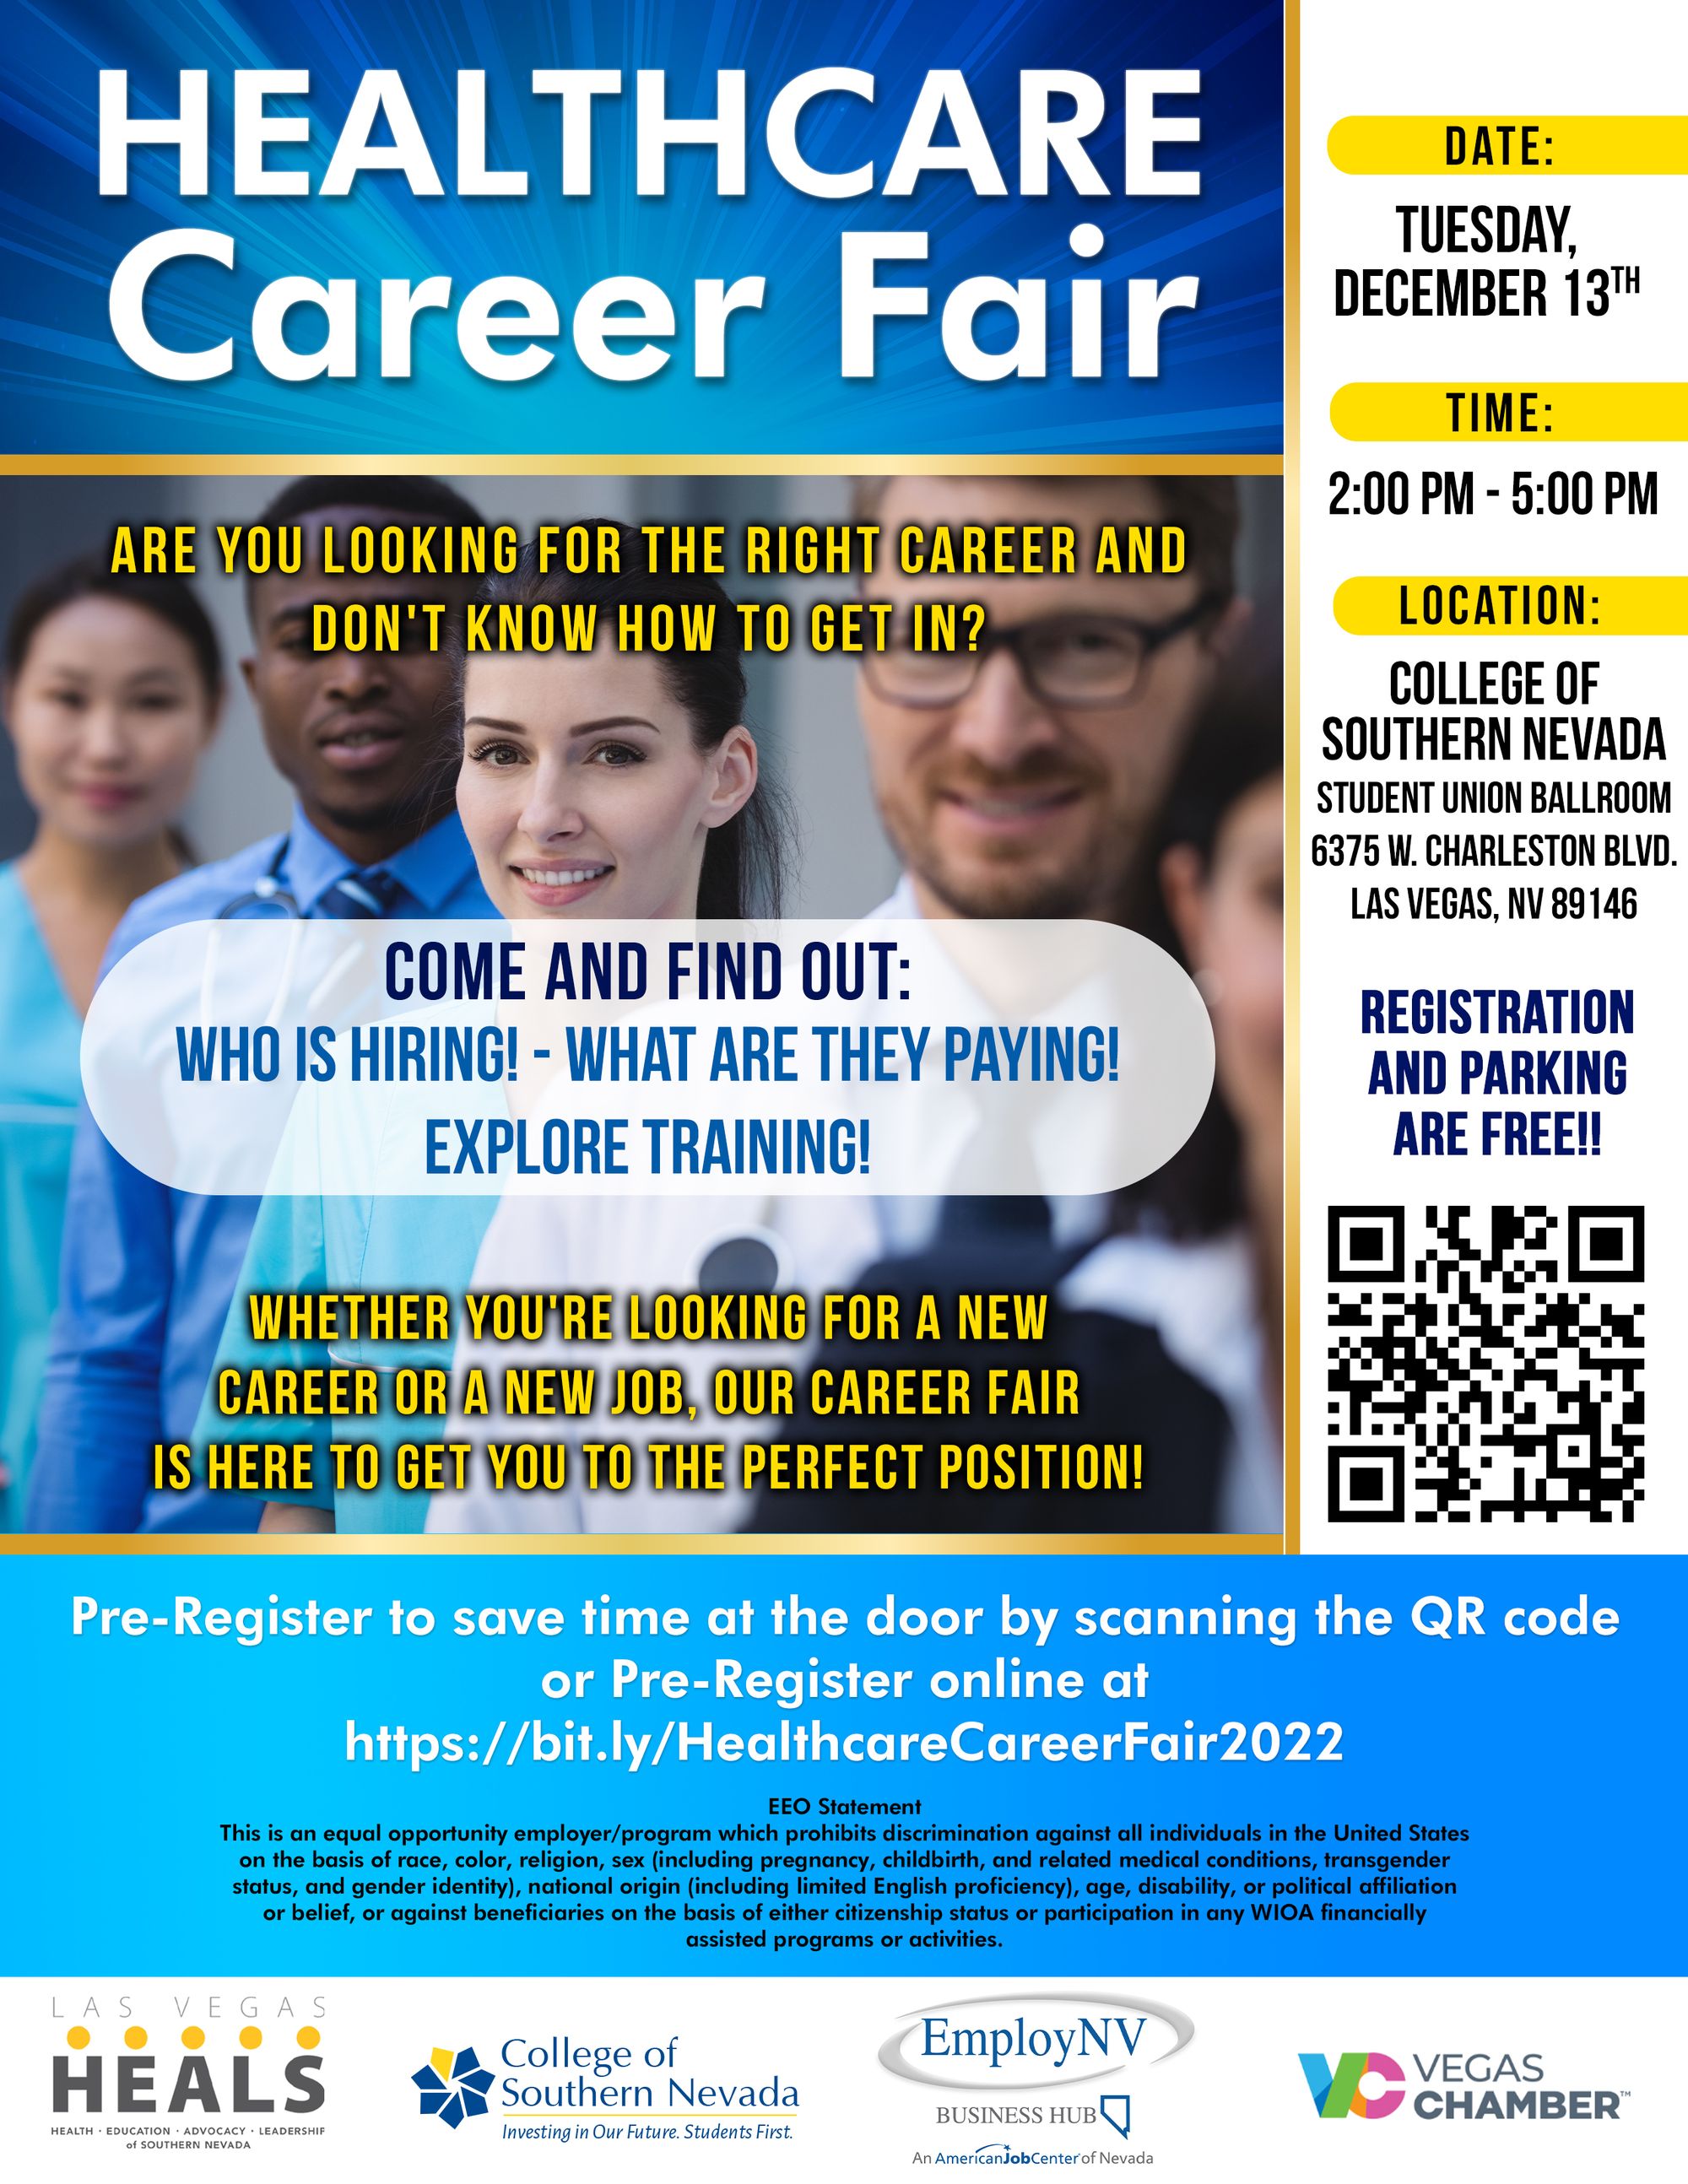 December 13 Healthcare Career Fair Offers Employment and Training